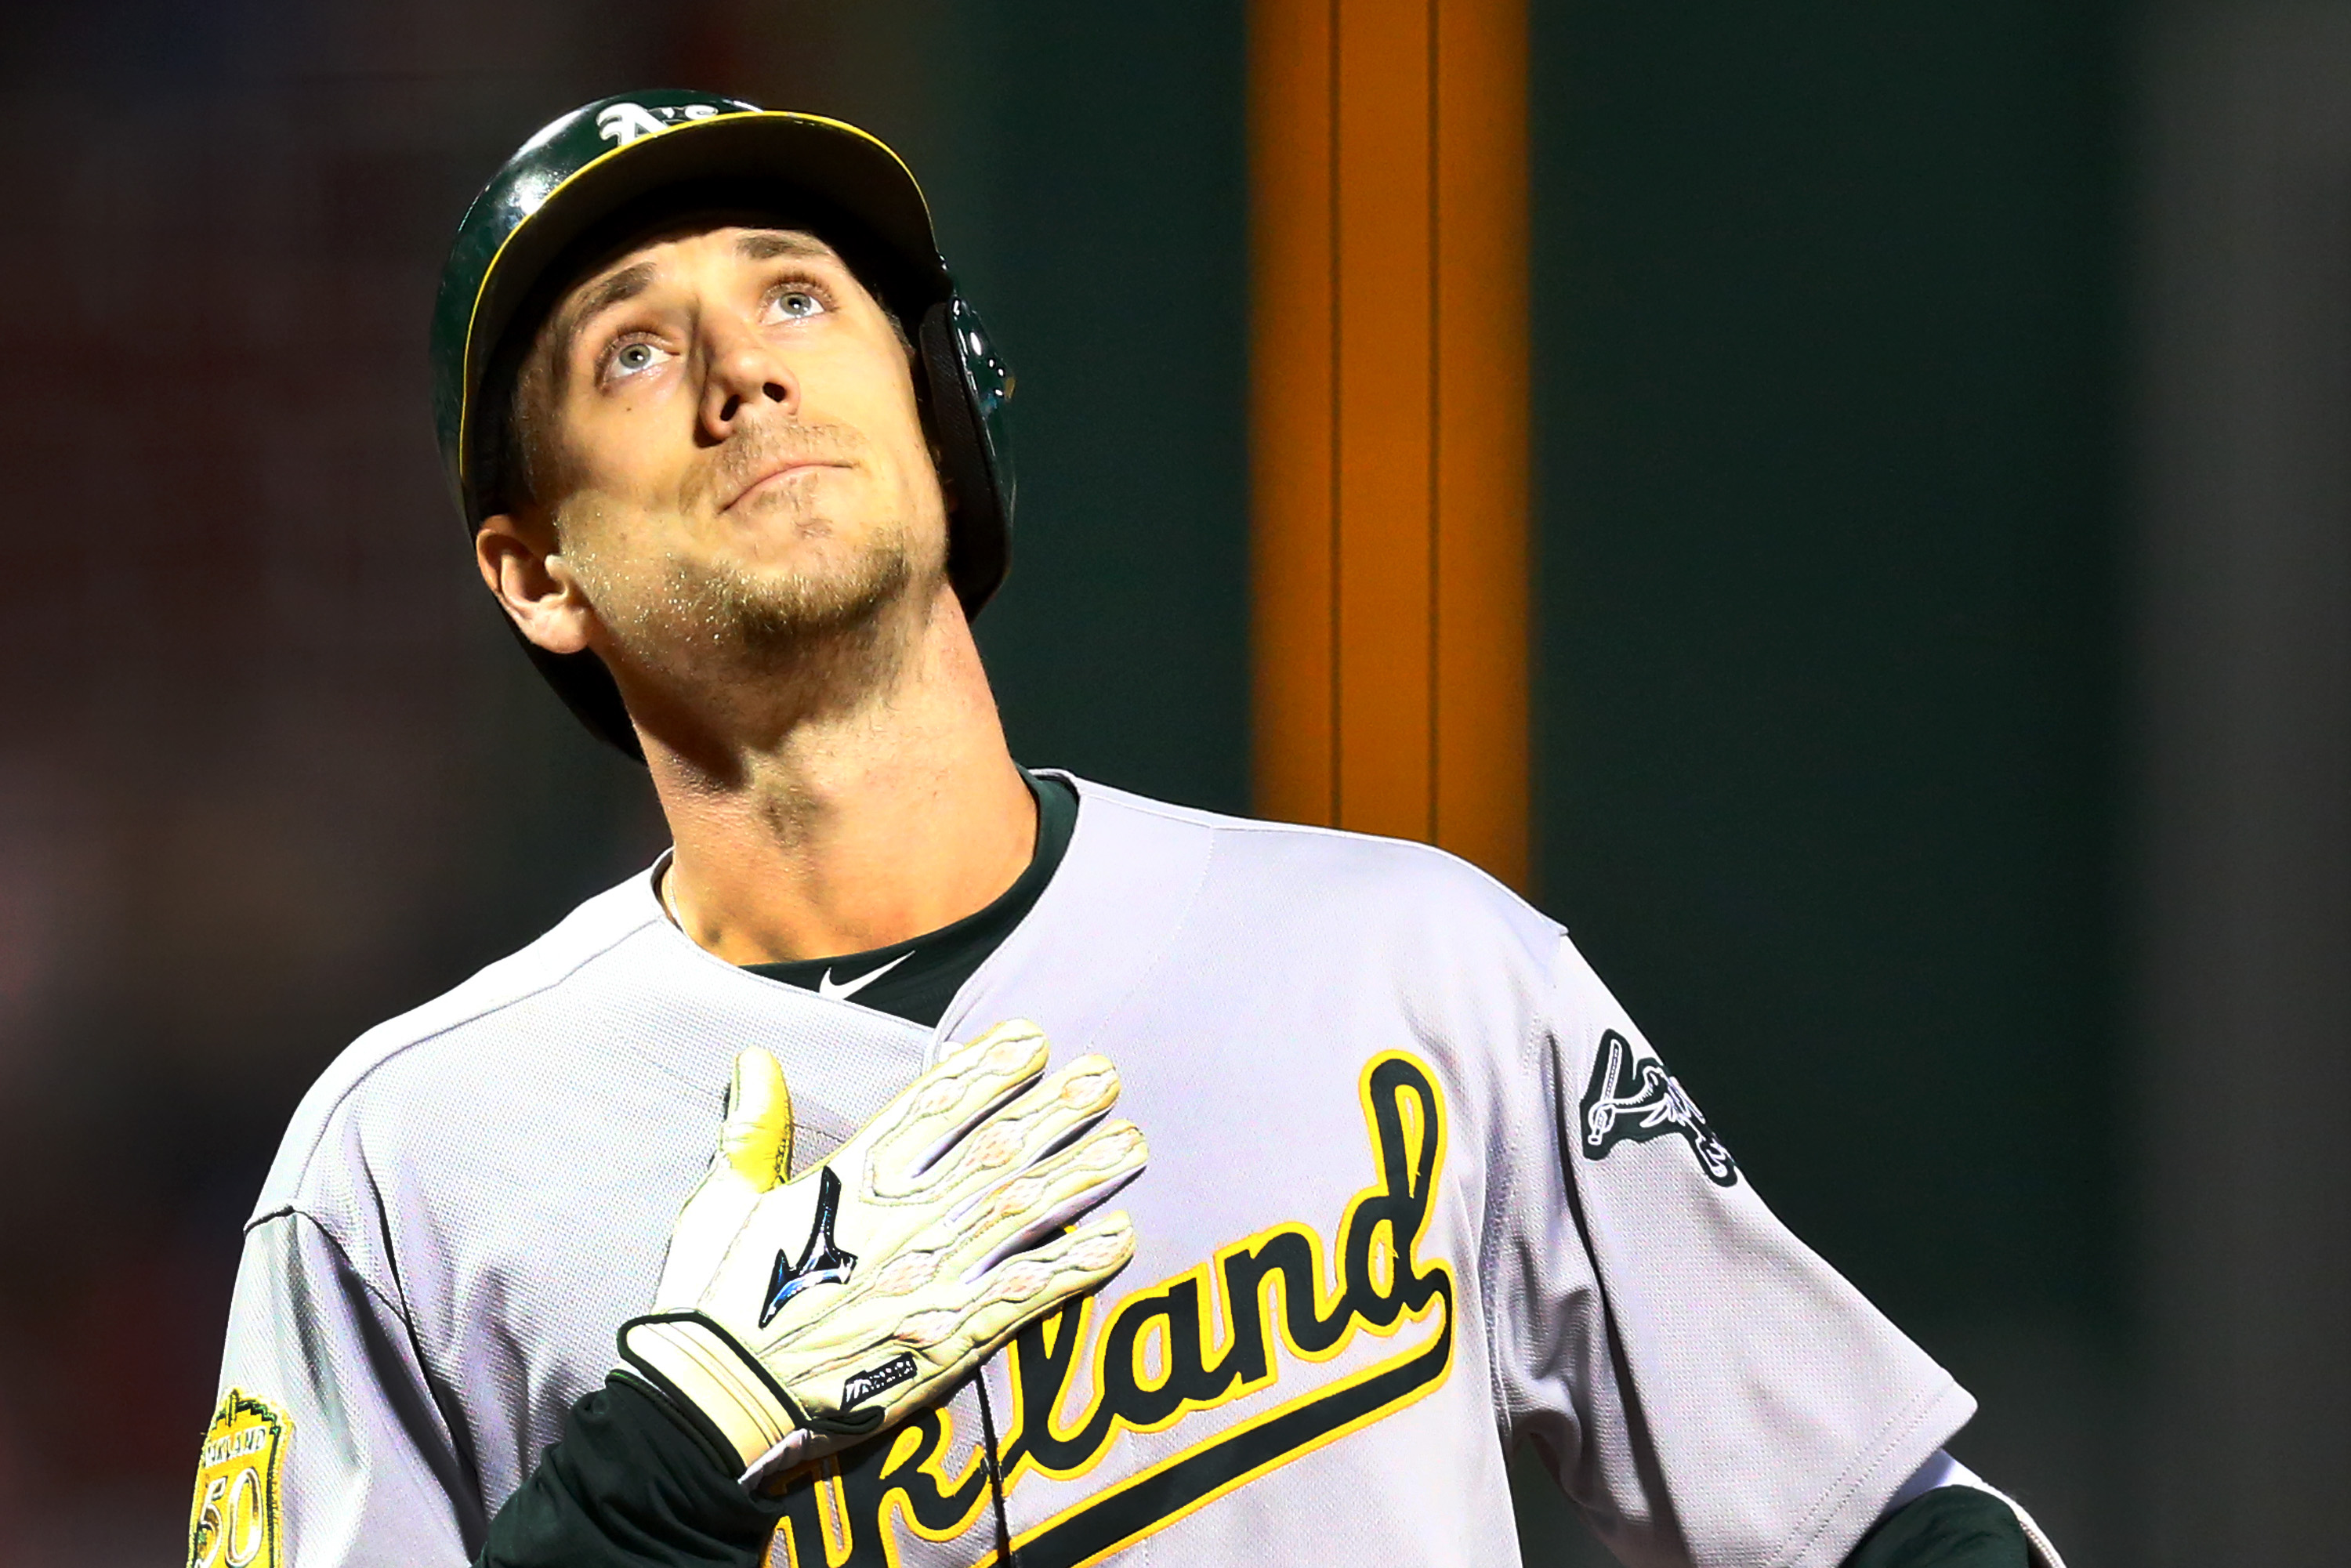 Oakland’s Stephen Piscotty Homered in His First At-Bat After His Mother’s Death